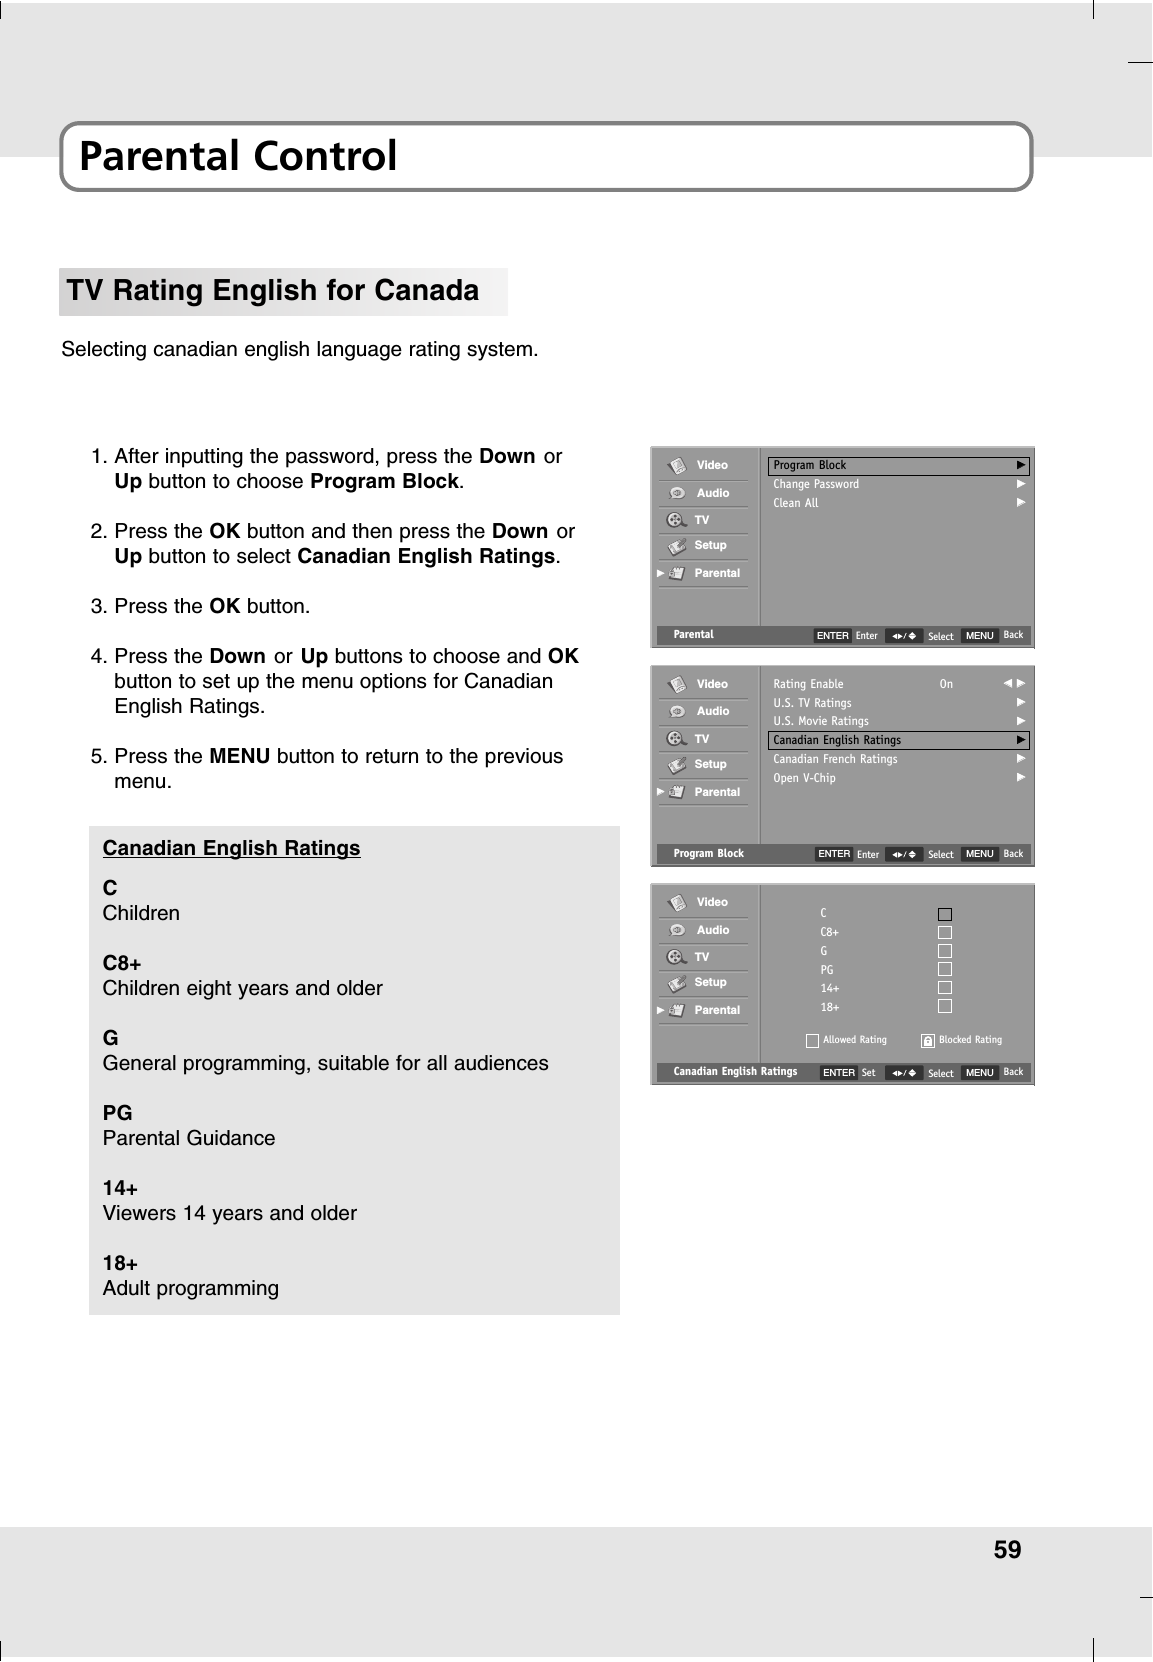 59Parental ControlTV Rating English for CanadaSelecting canadian english language rating system.1. After inputting the password, press the Down orUp button to choose Program Block.2. Press the OK button and then press the Down orUp button to select Canadian English Ratings.3. Press the OK button.4. Press the Down or Up buttons to choose and OKbutton to set up the menu options for CanadianEnglish Ratings.5. Press the MENU button to return to the previousmenu.Canadian English Ratings MENU BackSelectCC8+GPG14+18+Allowed RatingVideoAudioTVSetupParentalGGBlocked RatingENTER SetCChildrenC8+Children eight years and olderGGeneral programming, suitable for all audiencesPGParental Guidance 14+Viewers 14 years and older18+Adult programmingCanadian English Ratings Program Block MENU BackSelectRating EnableU.S. TV RatingsU.S. Movie RatingsCanadian English RatingsCanadian French RatingsOpen V-ChipOn FF  GGGGGGGGGGGGVideoAudioTVSetupParentalGGParental MENU BackSelectProgram BlockChange PasswordClean AllGGGGGGVideoAudioTVSetupParentalGGENTER EnterENTER Enter